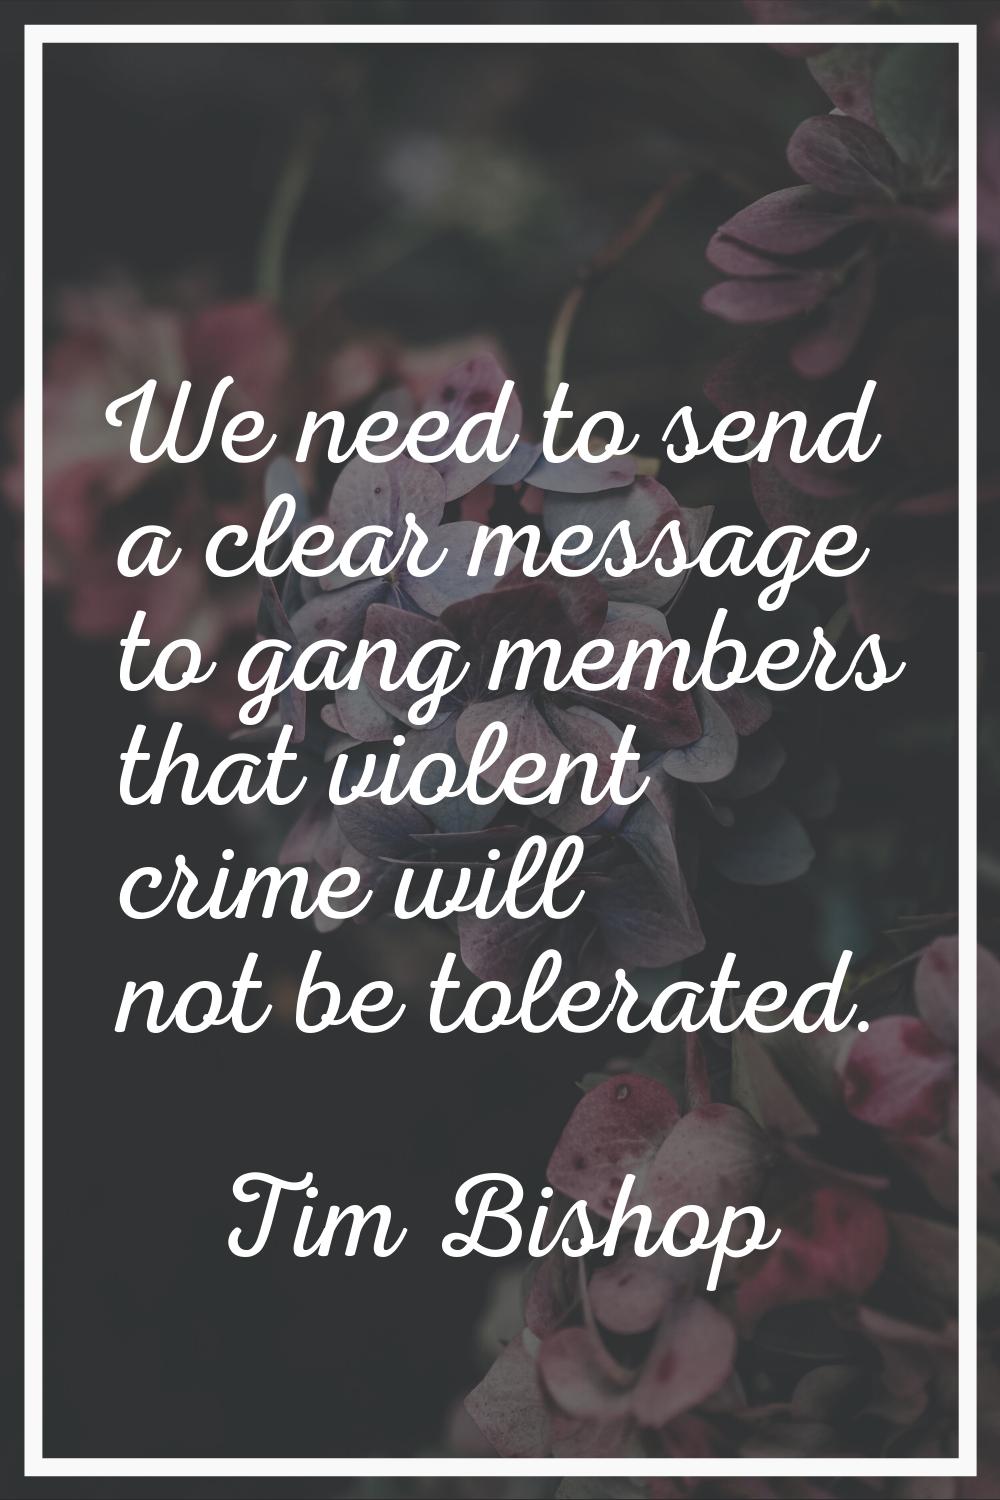 We need to send a clear message to gang members that violent crime will not be tolerated.